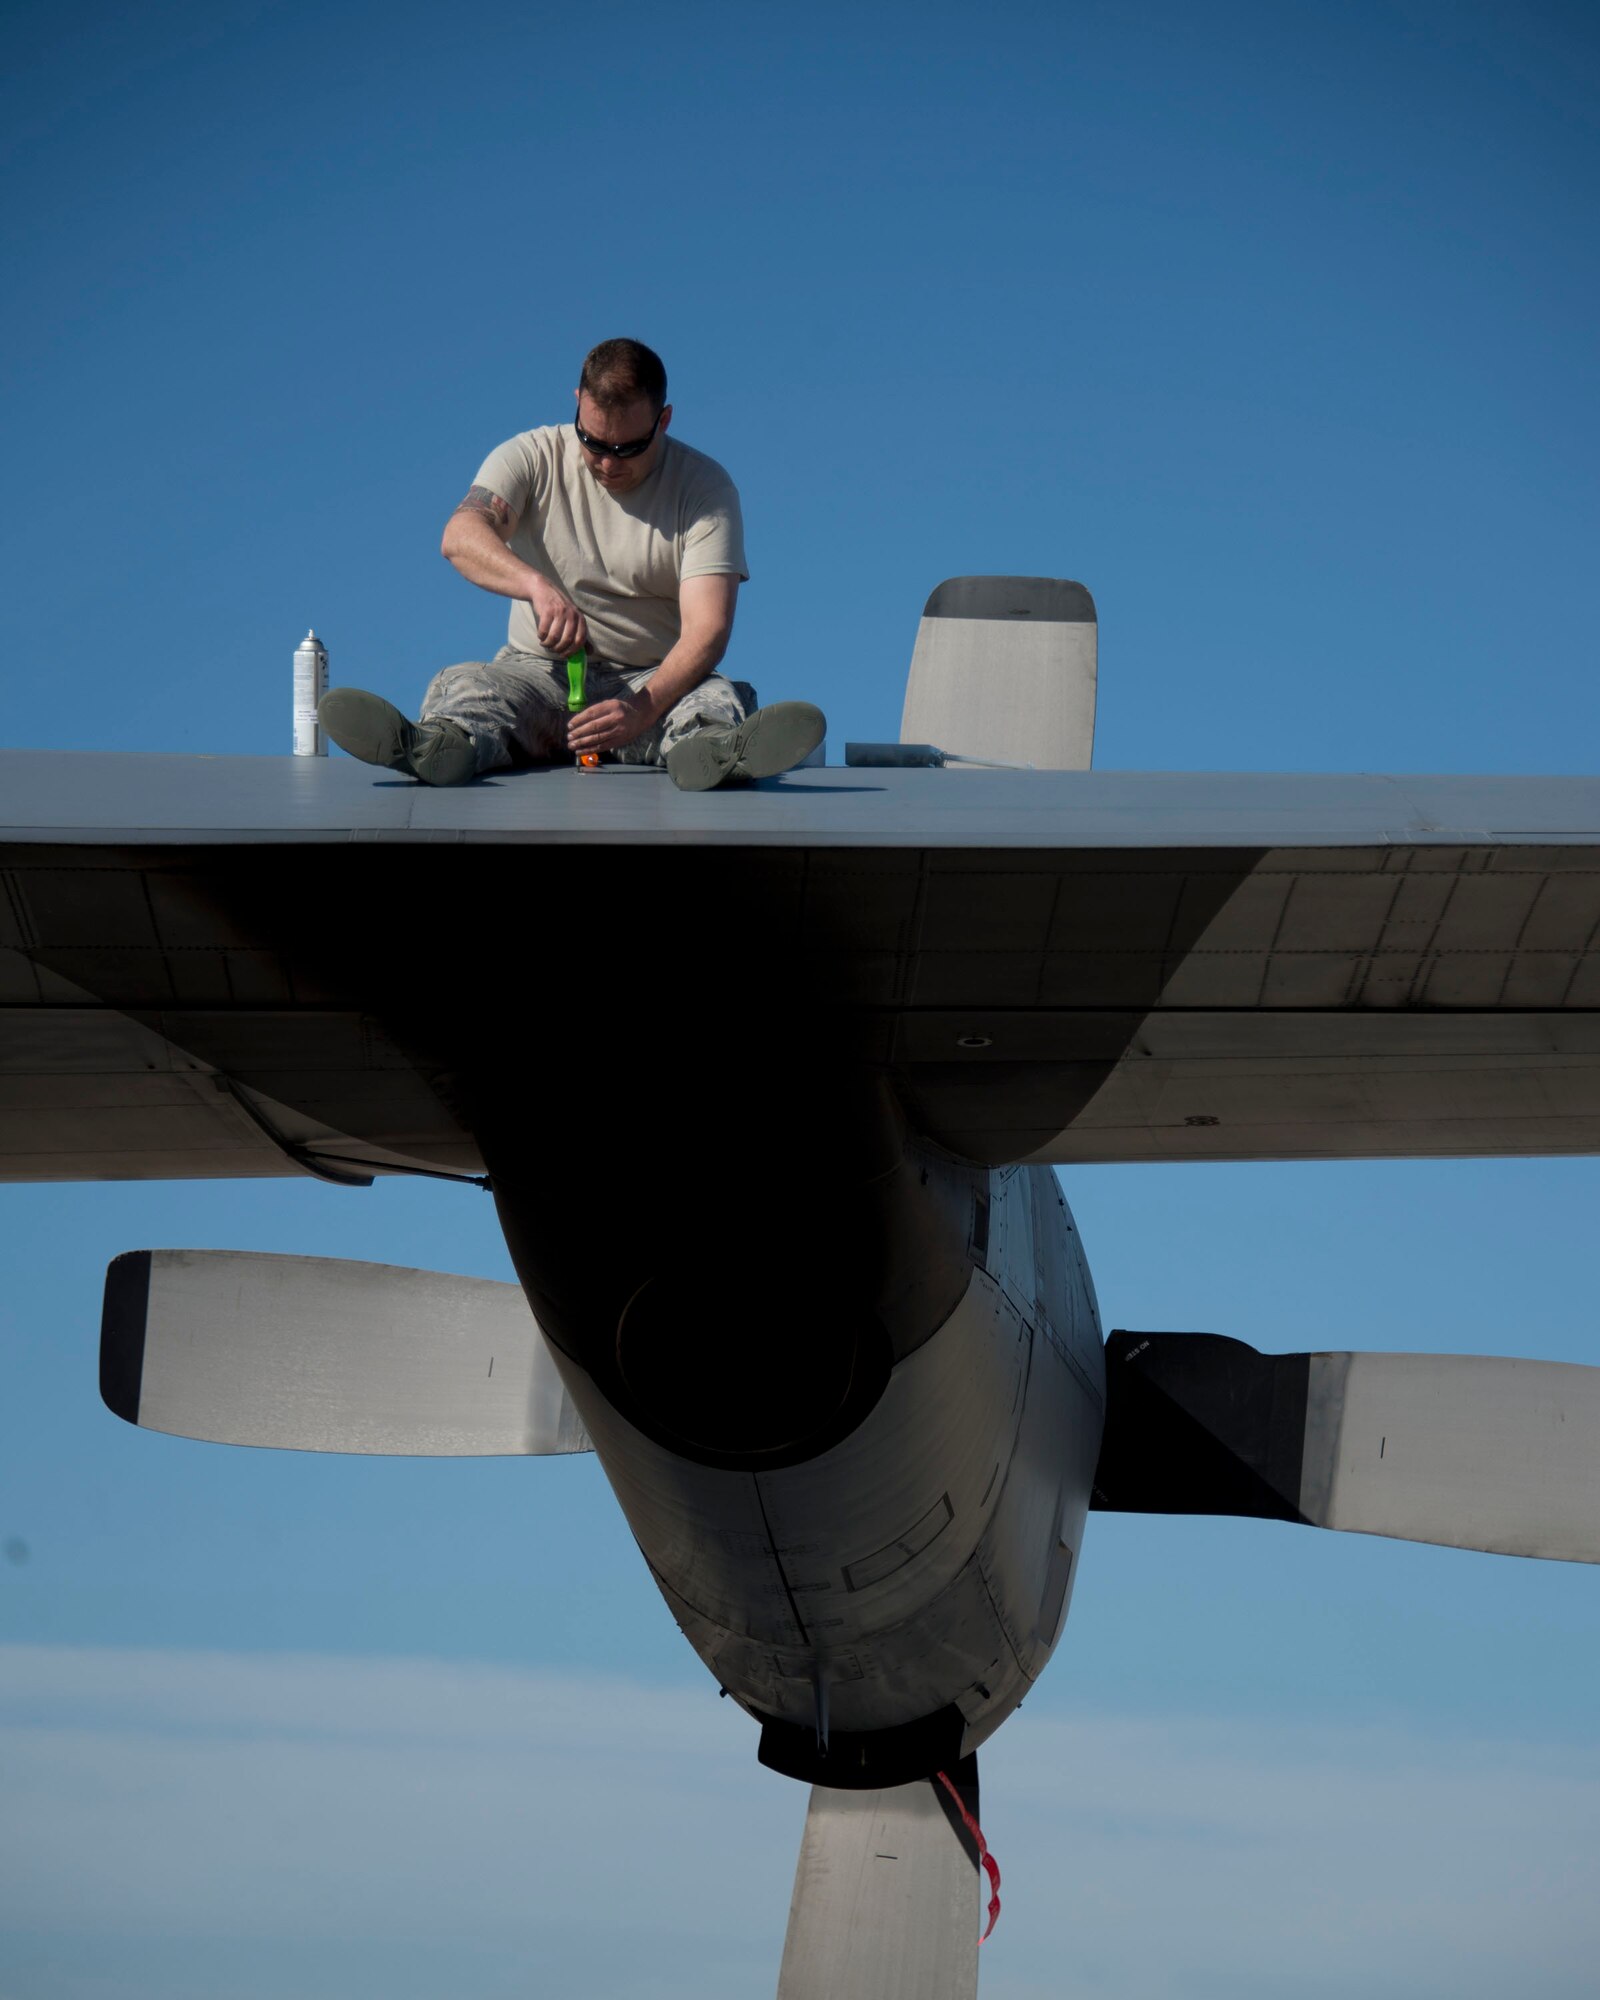 Master Sgt. Tom Heckman, 133rd Aircraft Maintenance Squadron, sits on the wing of a C-130 Hercules in Yuma, Ariz., Feb. 26, 2014. Heckman is conducting a pre-flight inspection. 
(U.S. Air National Guard photo by Tech. Sgt. Amy M. Lovgren/Released) 